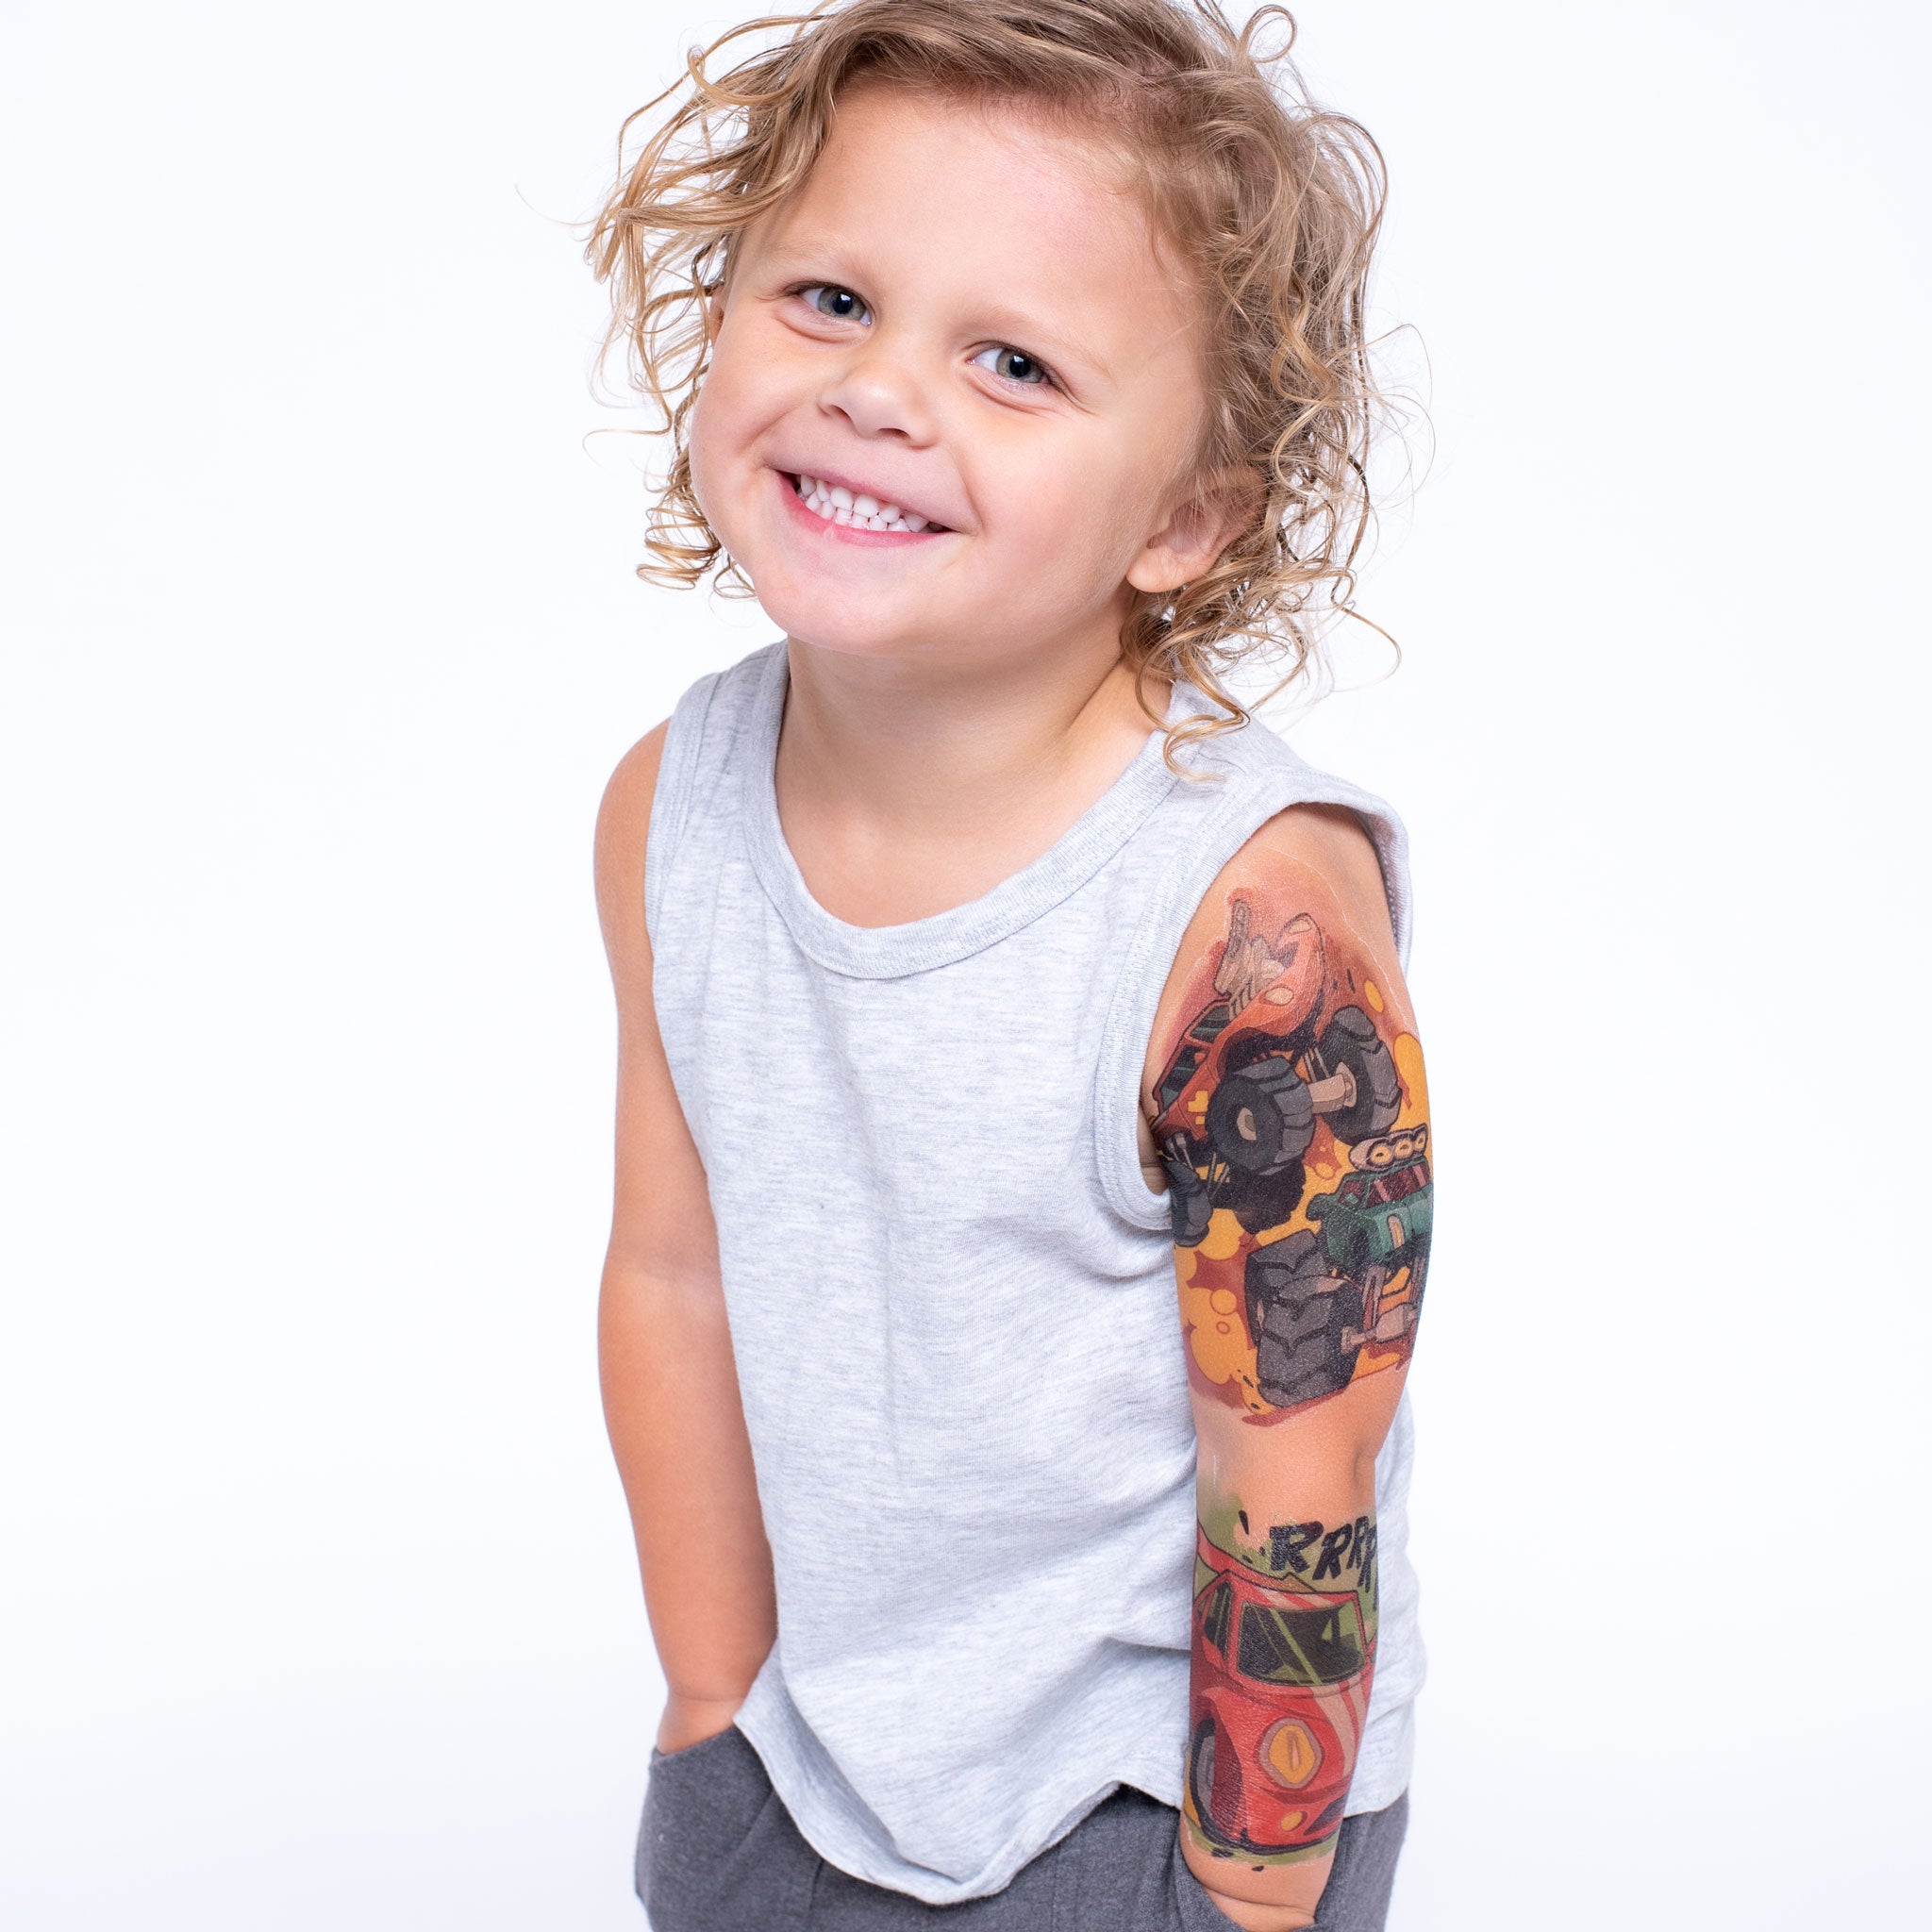 Large Black Totem Full Arm Temporary Arm Tattoo Waterproof Skull Lion Sleeve  Sticker For Boys 5731123 From Nomt, $14.45 | DHgate.Com